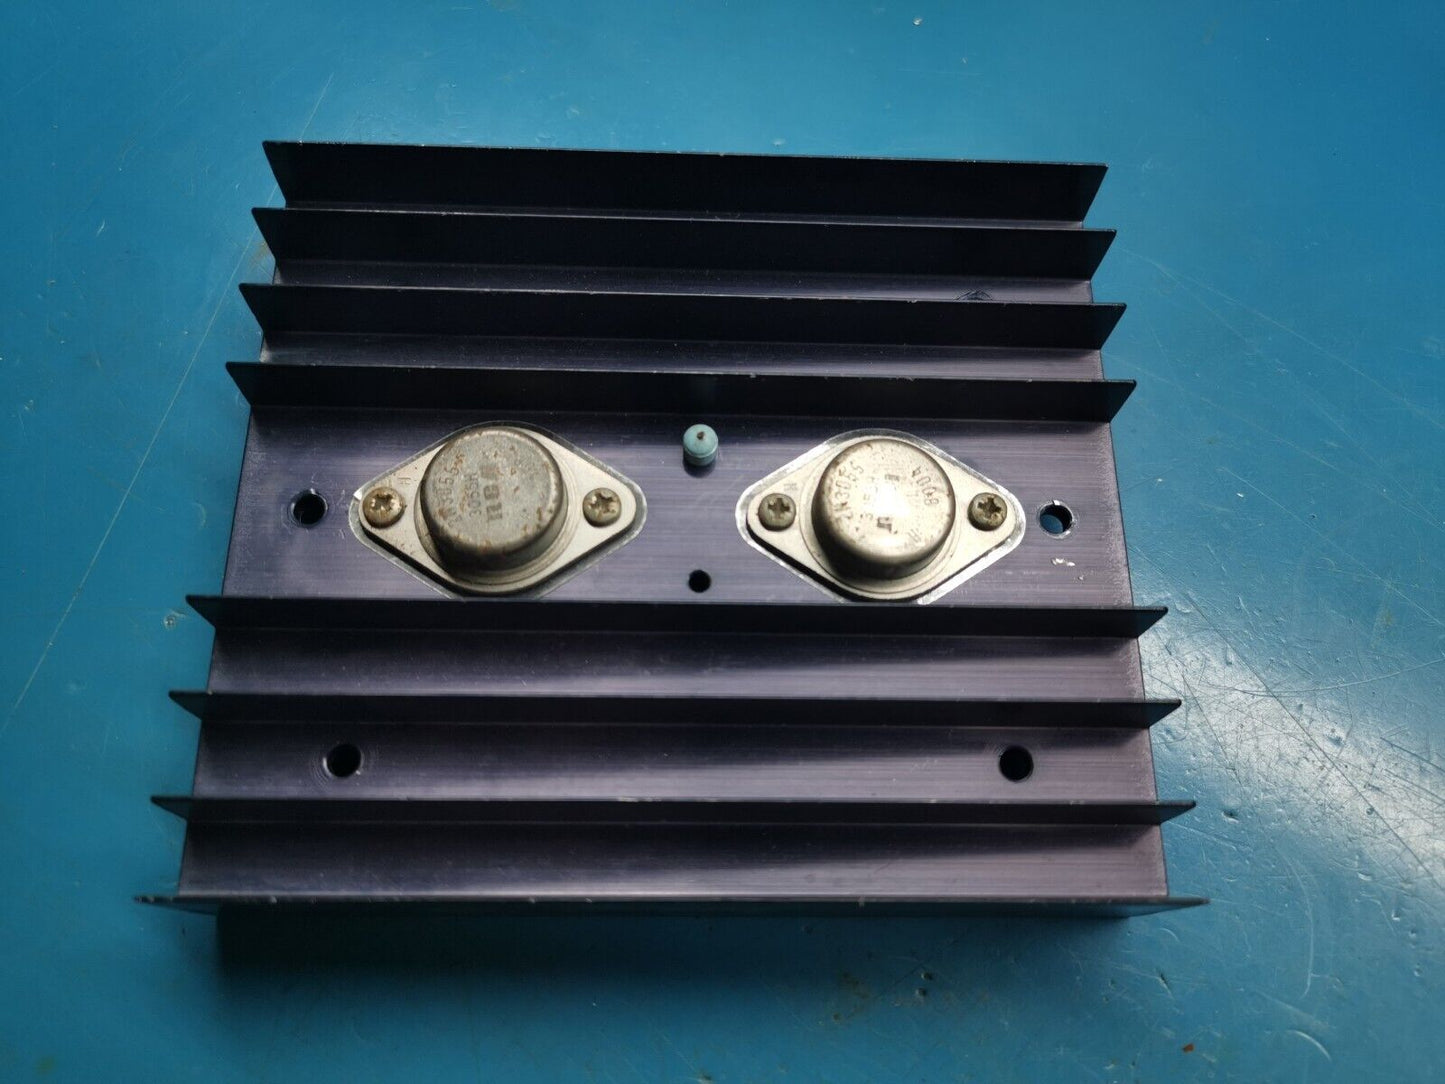 TO3 Heat Sink With 2N3055 Transistor From Military Power Supply